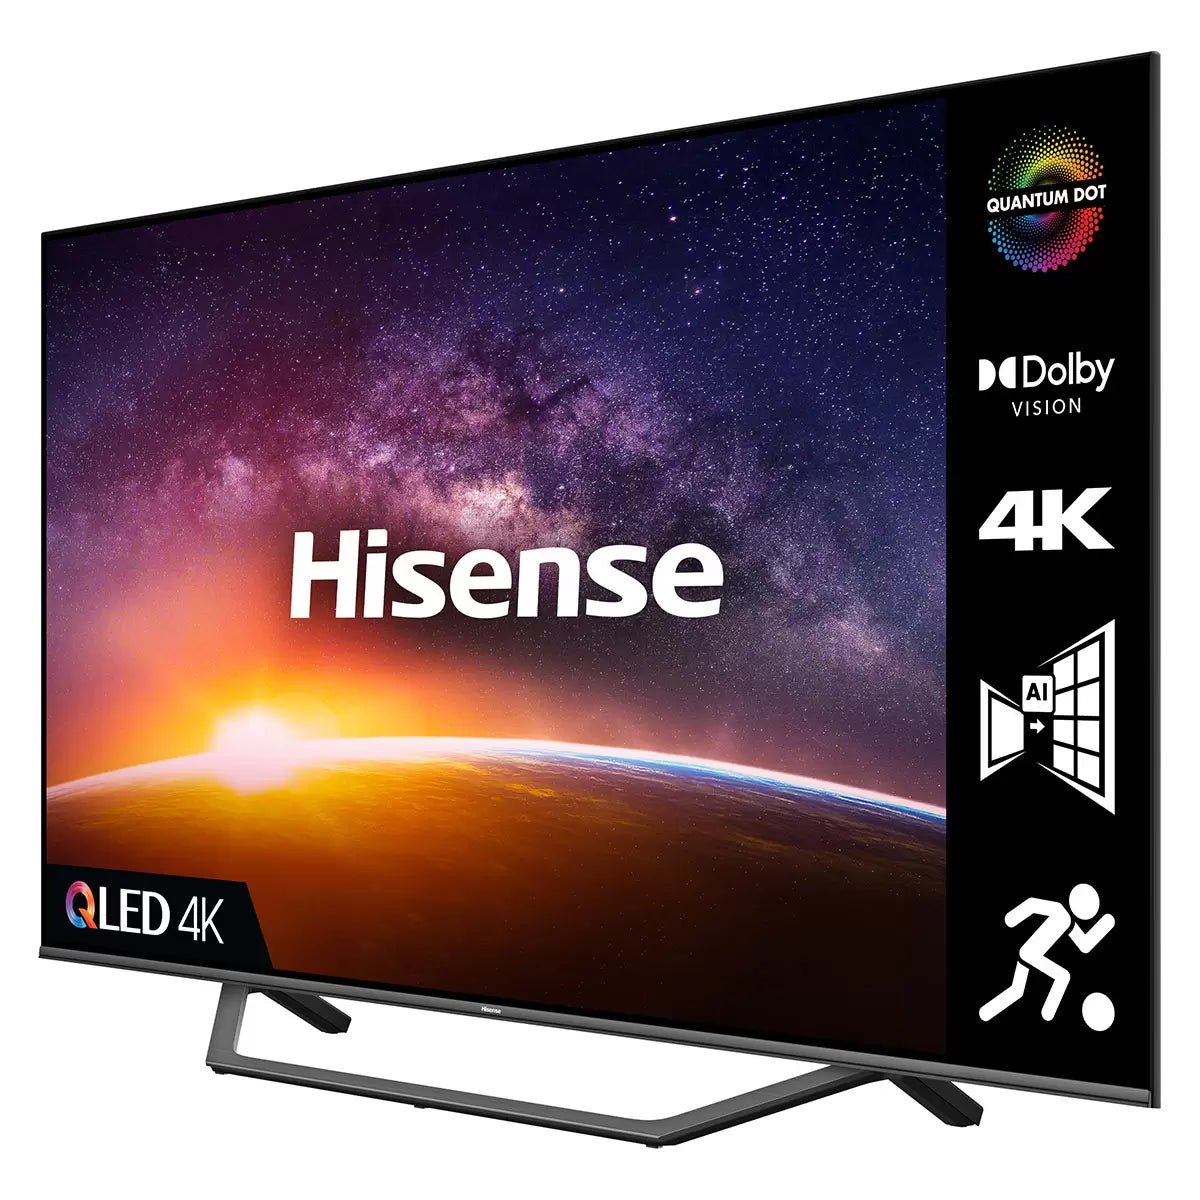 HISENSE 43A7100FTUK 43-inch 4K UHD HDR Smart TV with Freeview play